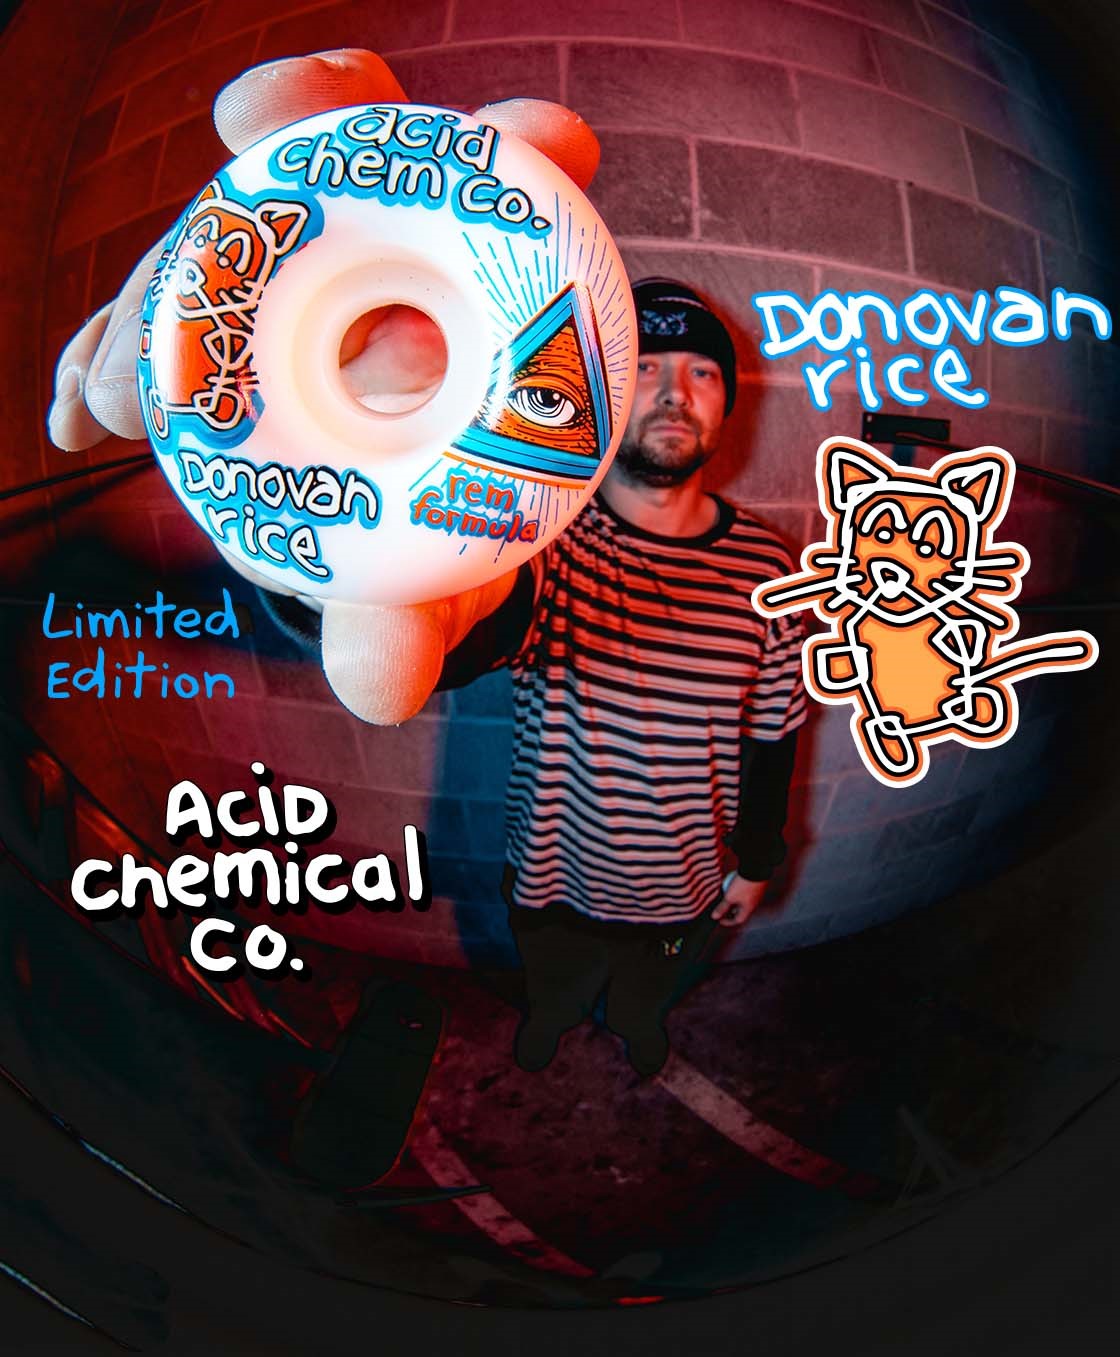 New Donovan Rice Pro Wheel out now From Acid Chemical Co!